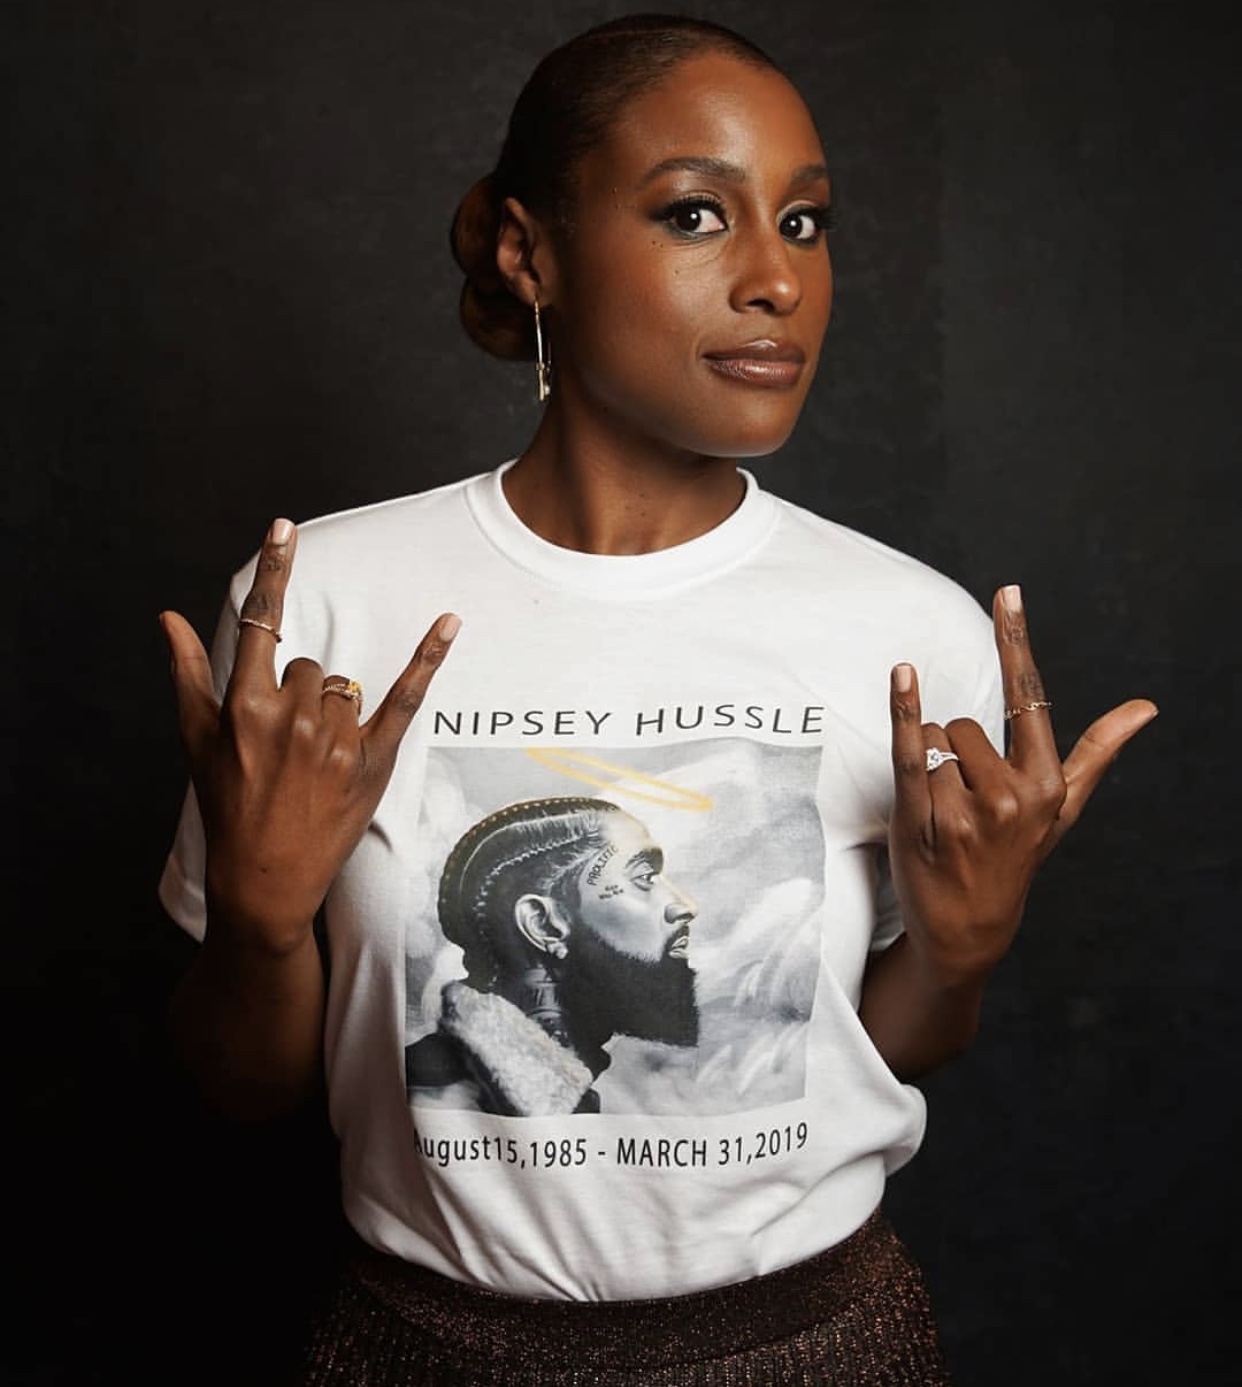 Issa Rae showed love on the ‘Gram, wearing a t-shirt with artwork by @DaRealIcon.1242 x 1387